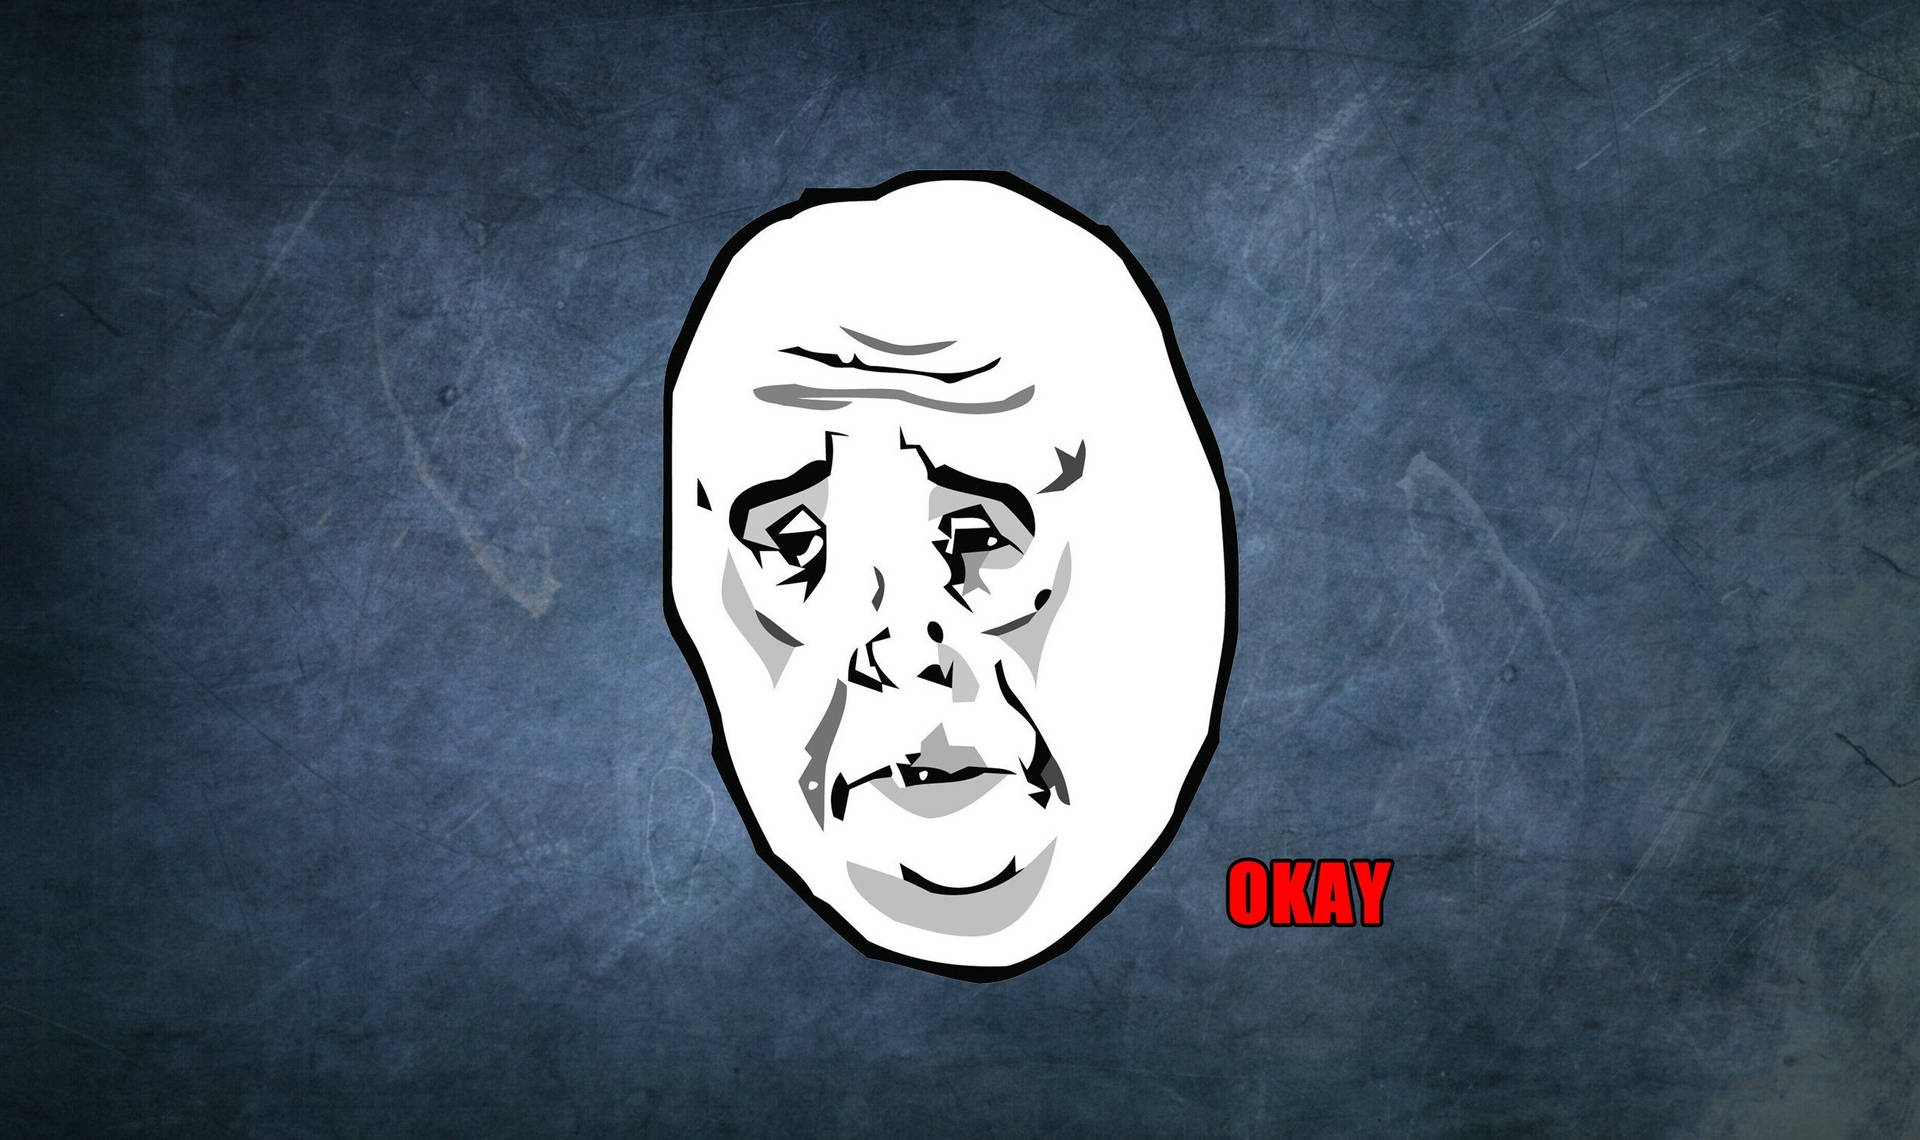 Sad rage comic meme with an old face that says okay in a blue-grey background.